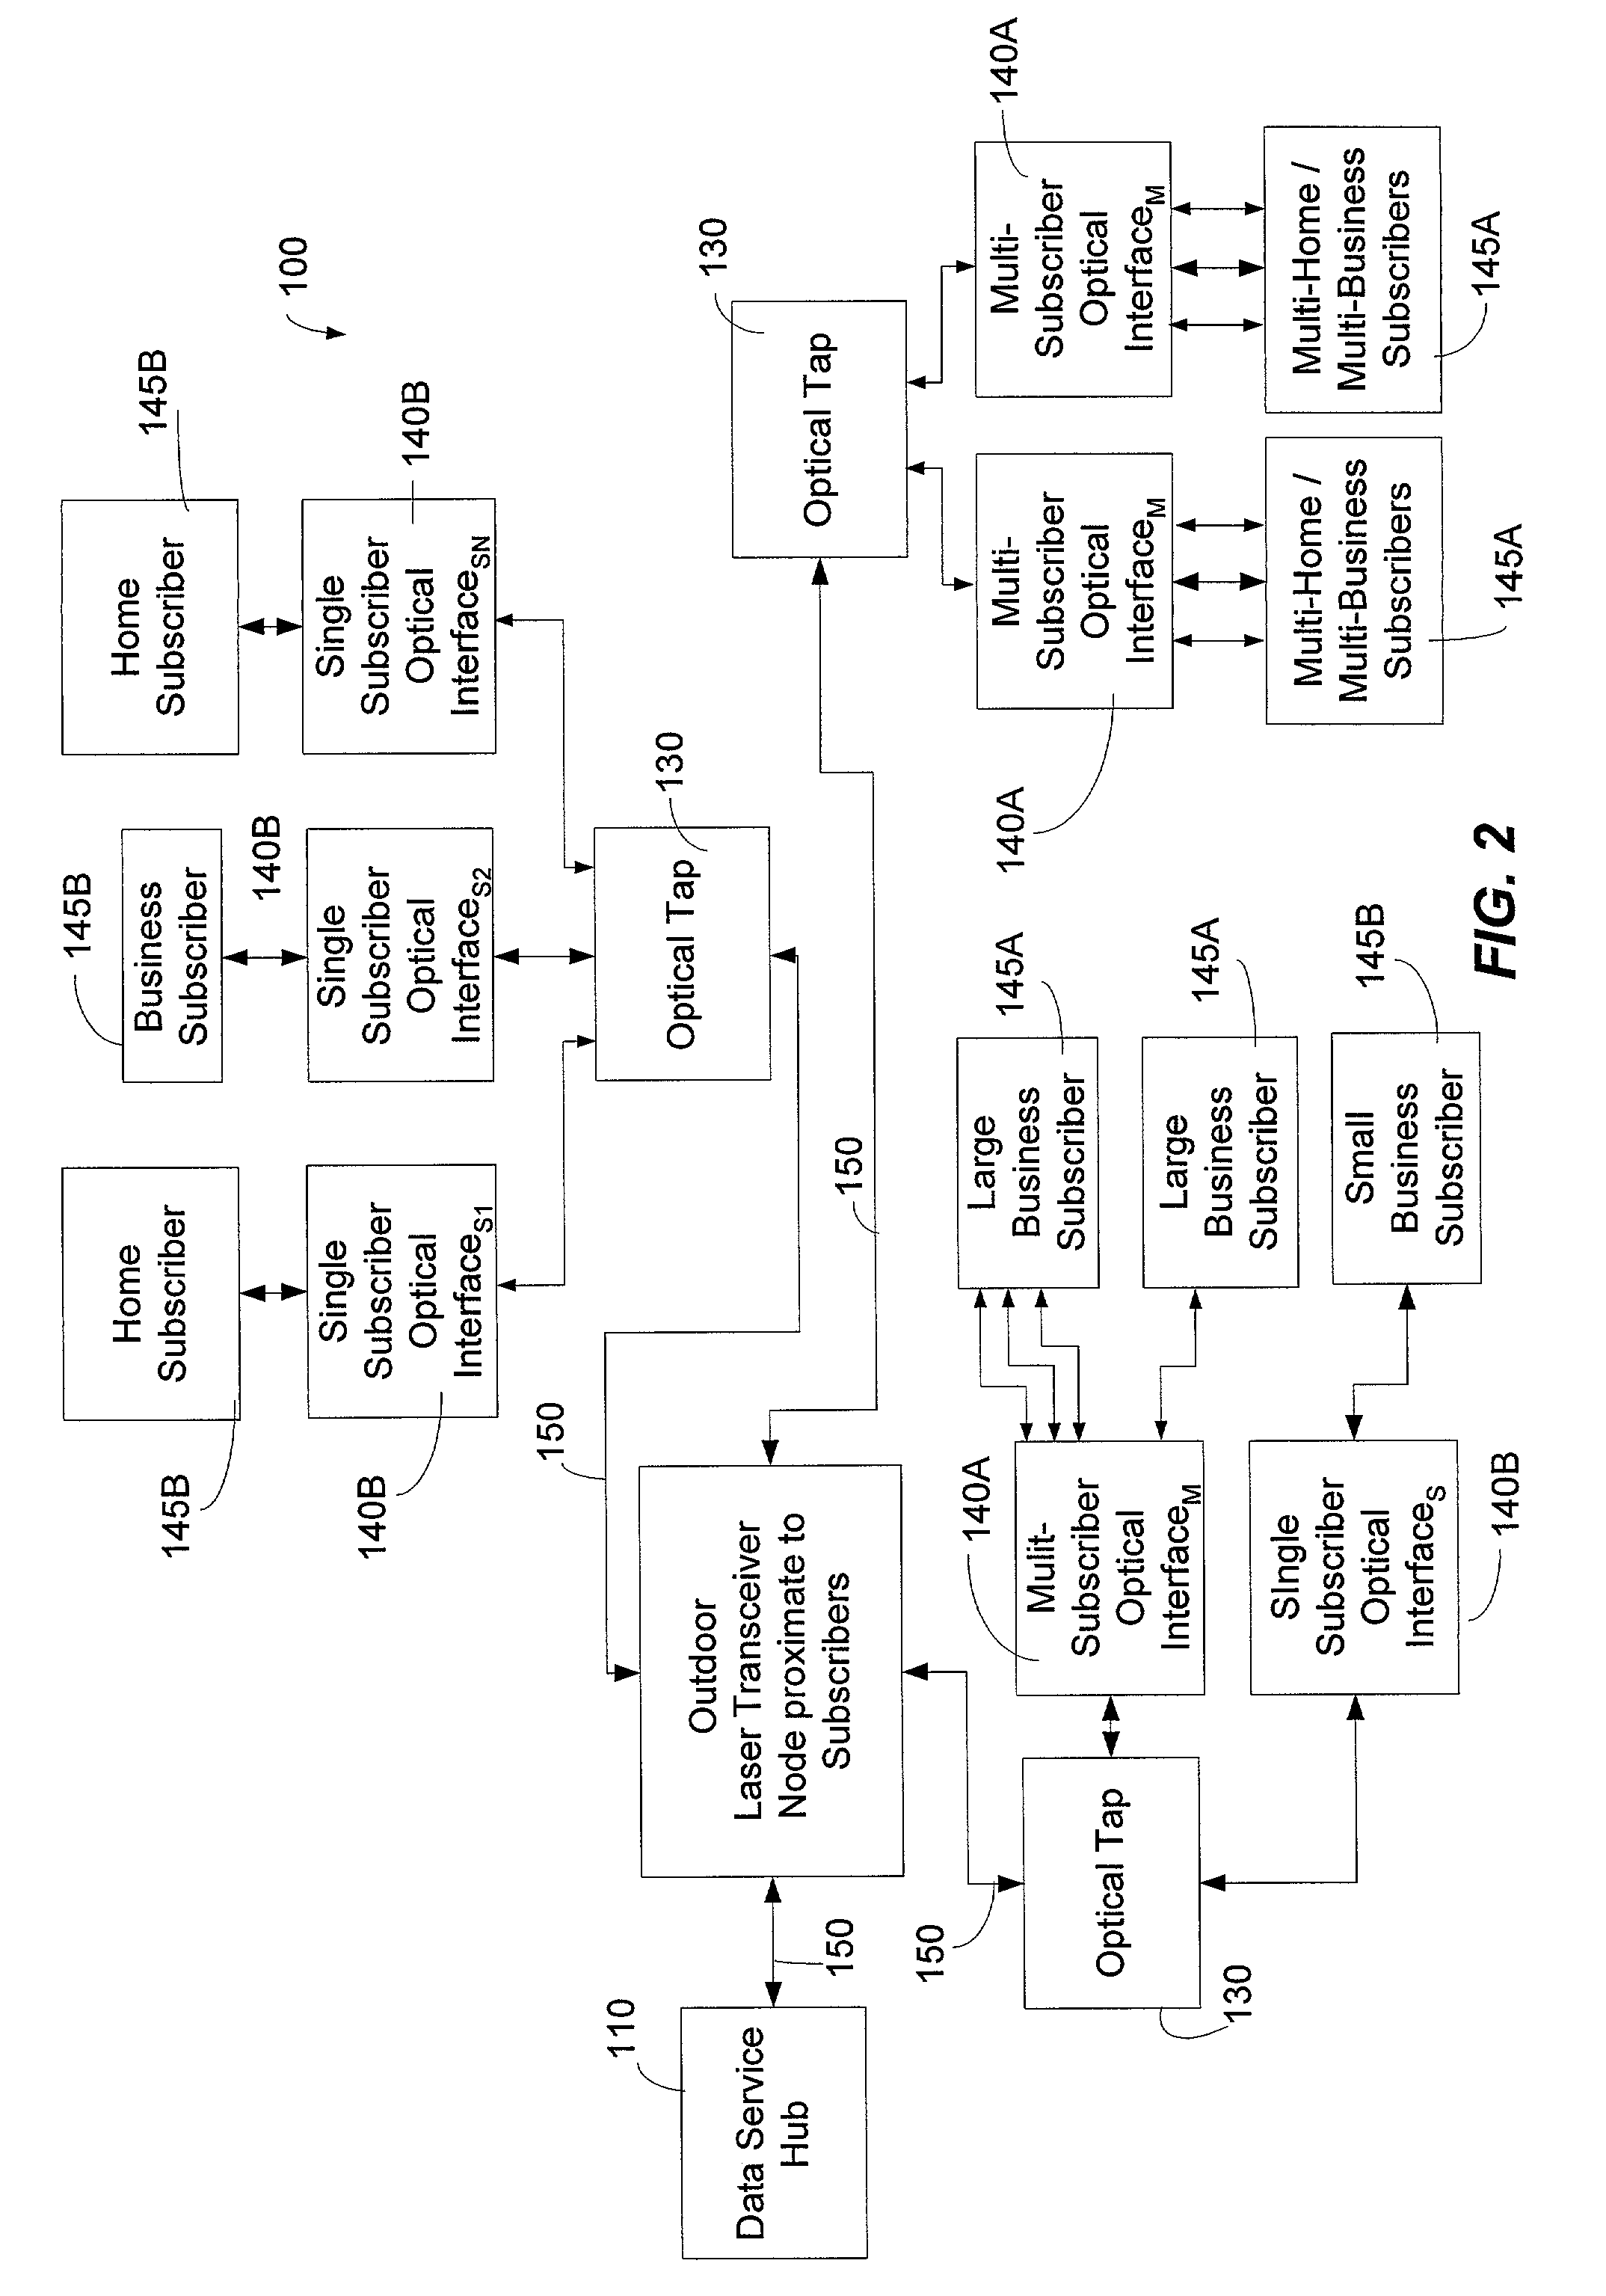 System and method for communicating optical signals to multiple subscribers having various bandwidth demands connected to the same optical waveguide